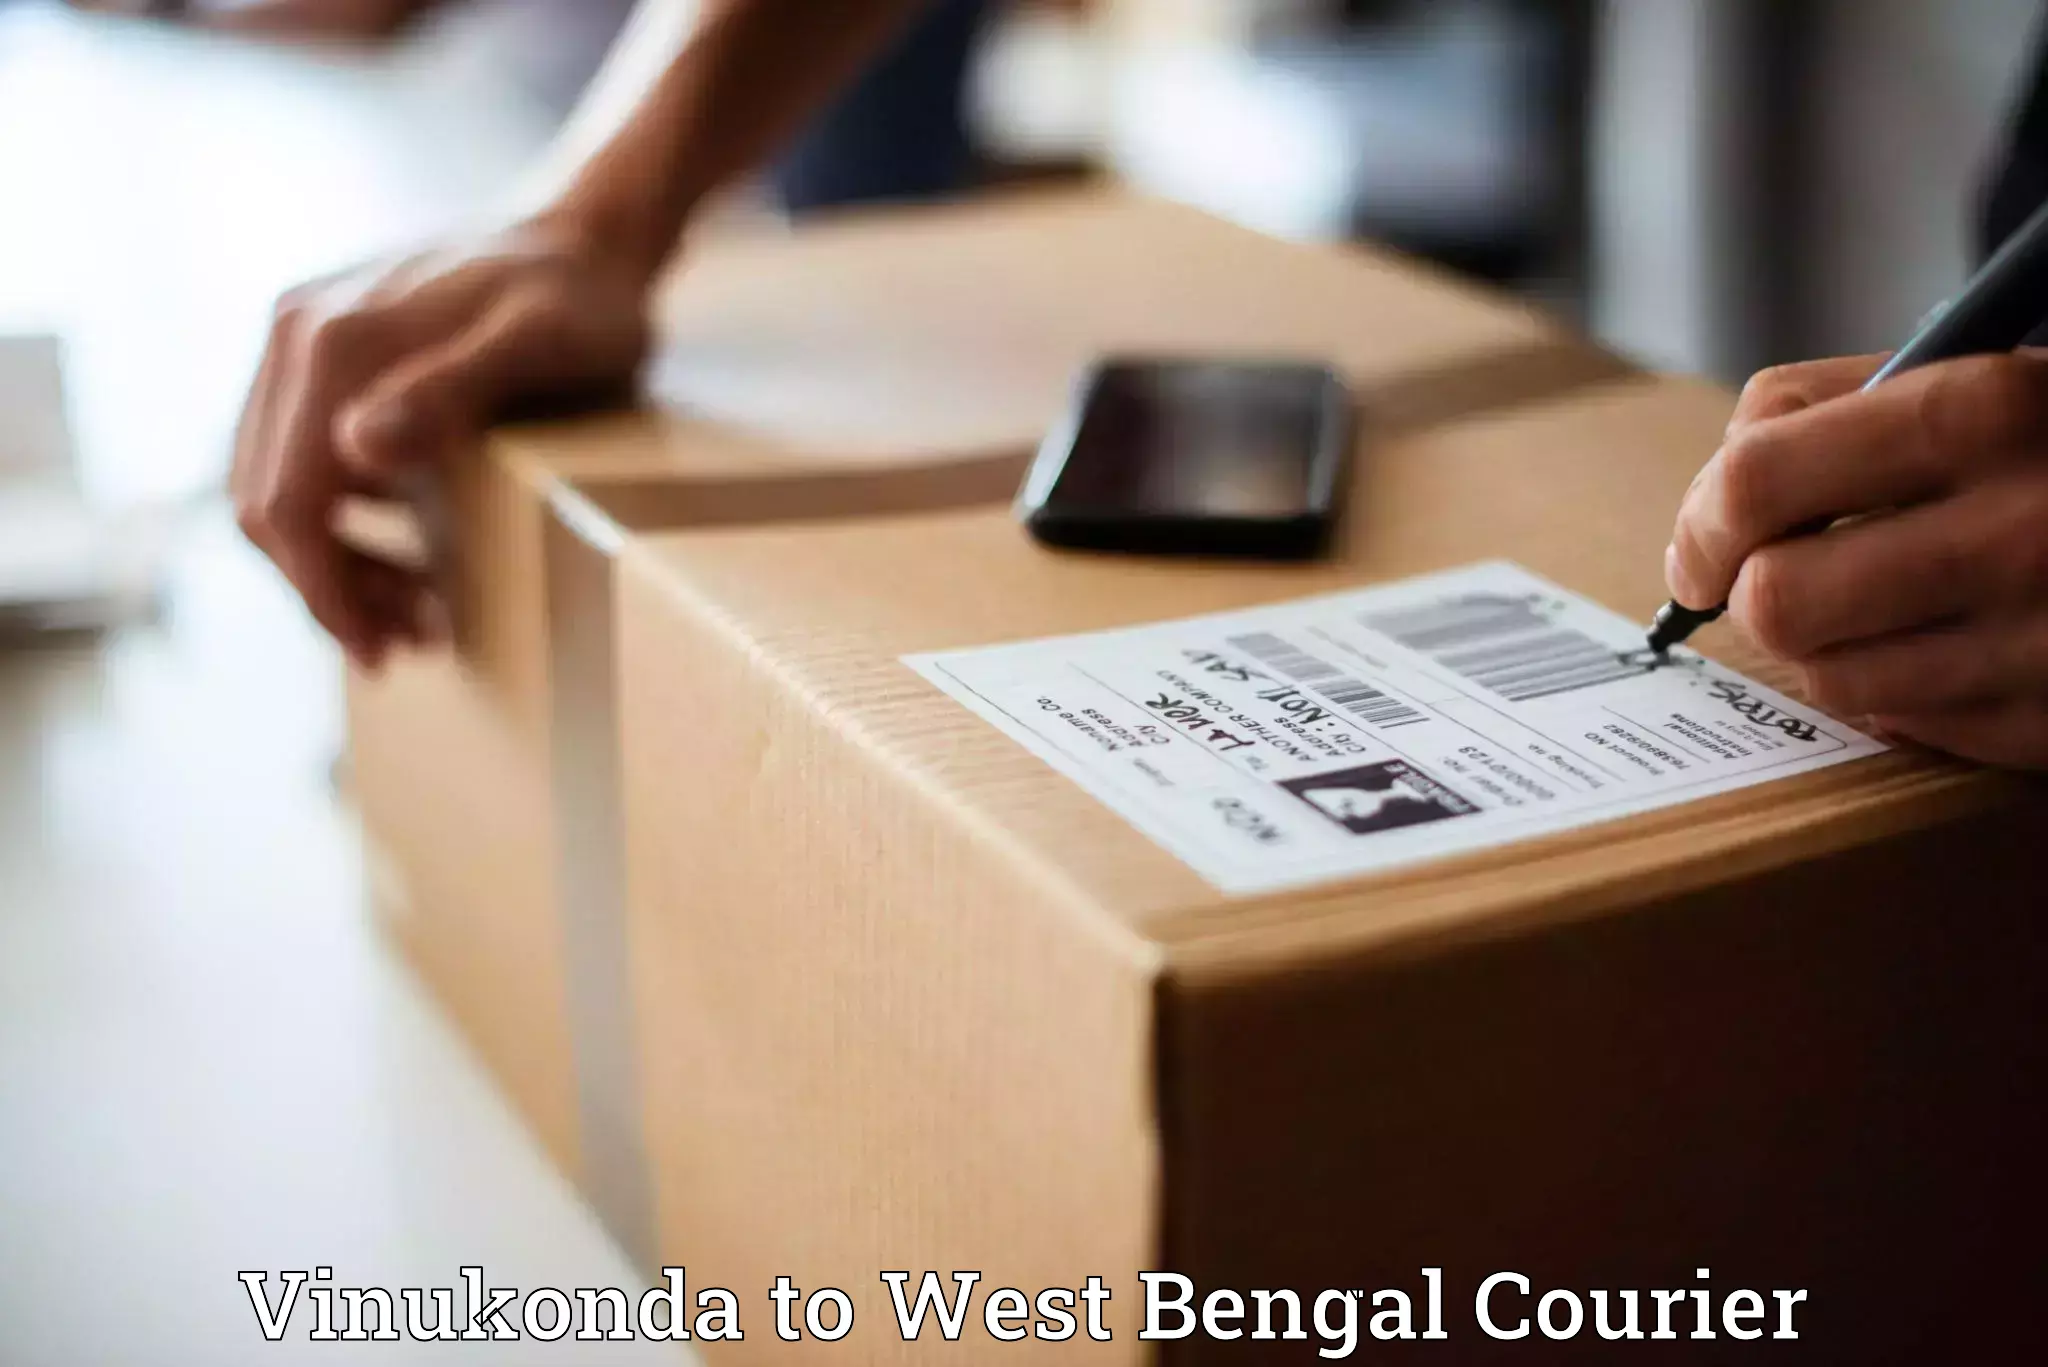 Local delivery service Vinukonda to West Bengal